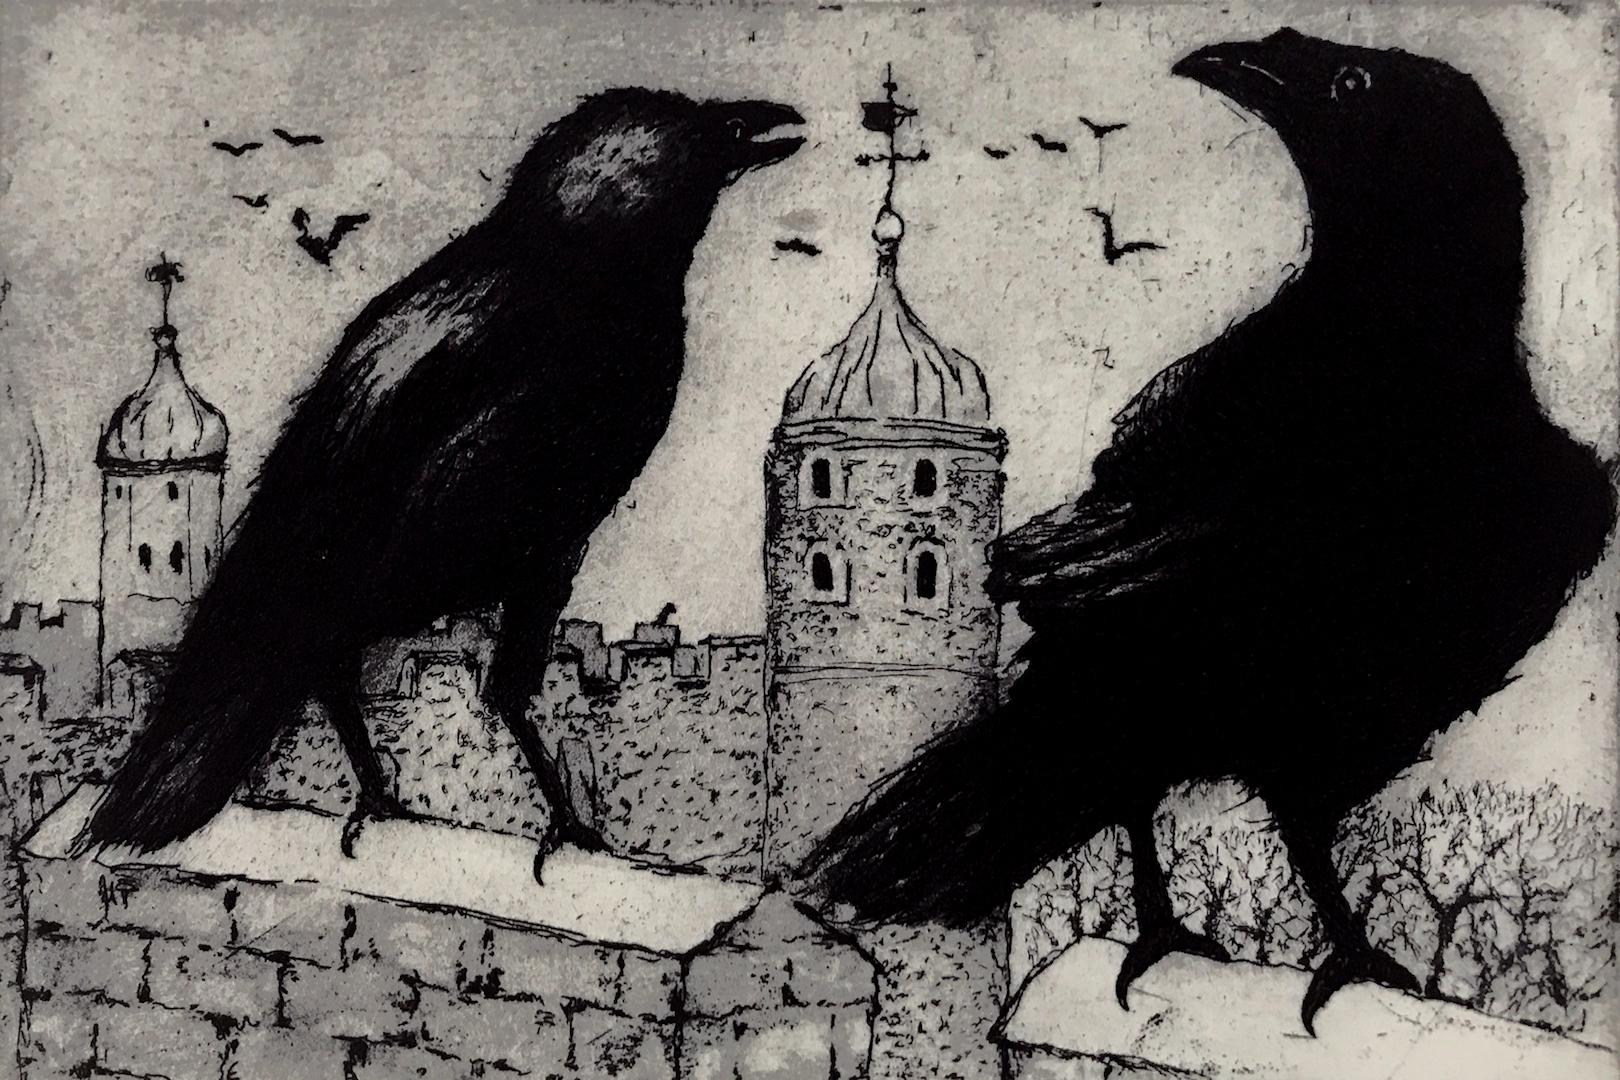 Tim Southall, Ravens at the Tower, Etching, Affordable Art, Art Online